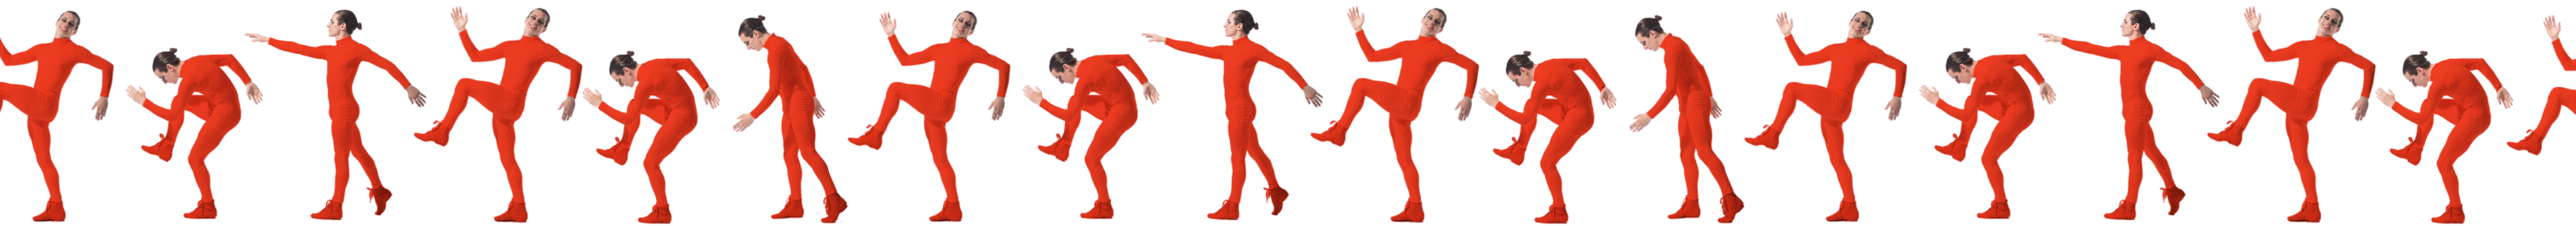 a series of images showing stages of movement from a dancer in a red costume